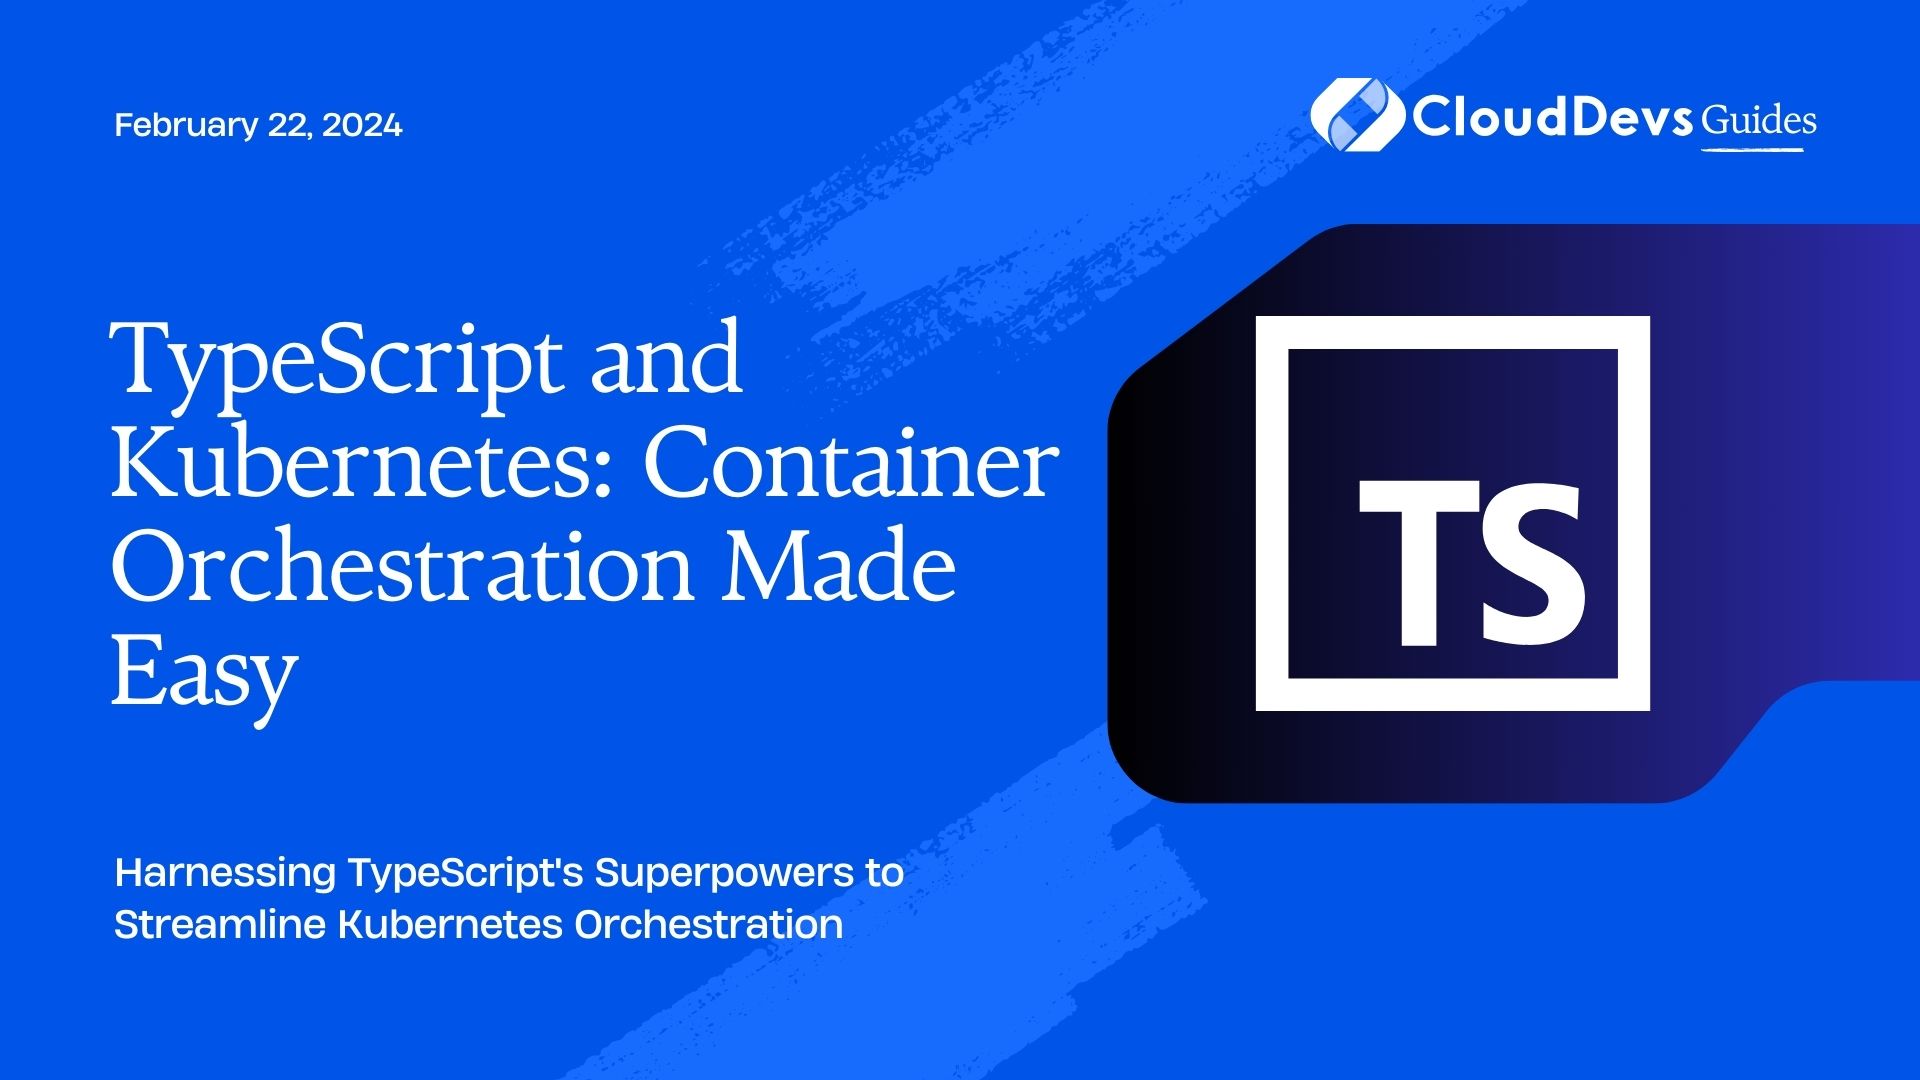 TypeScript and Kubernetes: Container Orchestration Made Easy